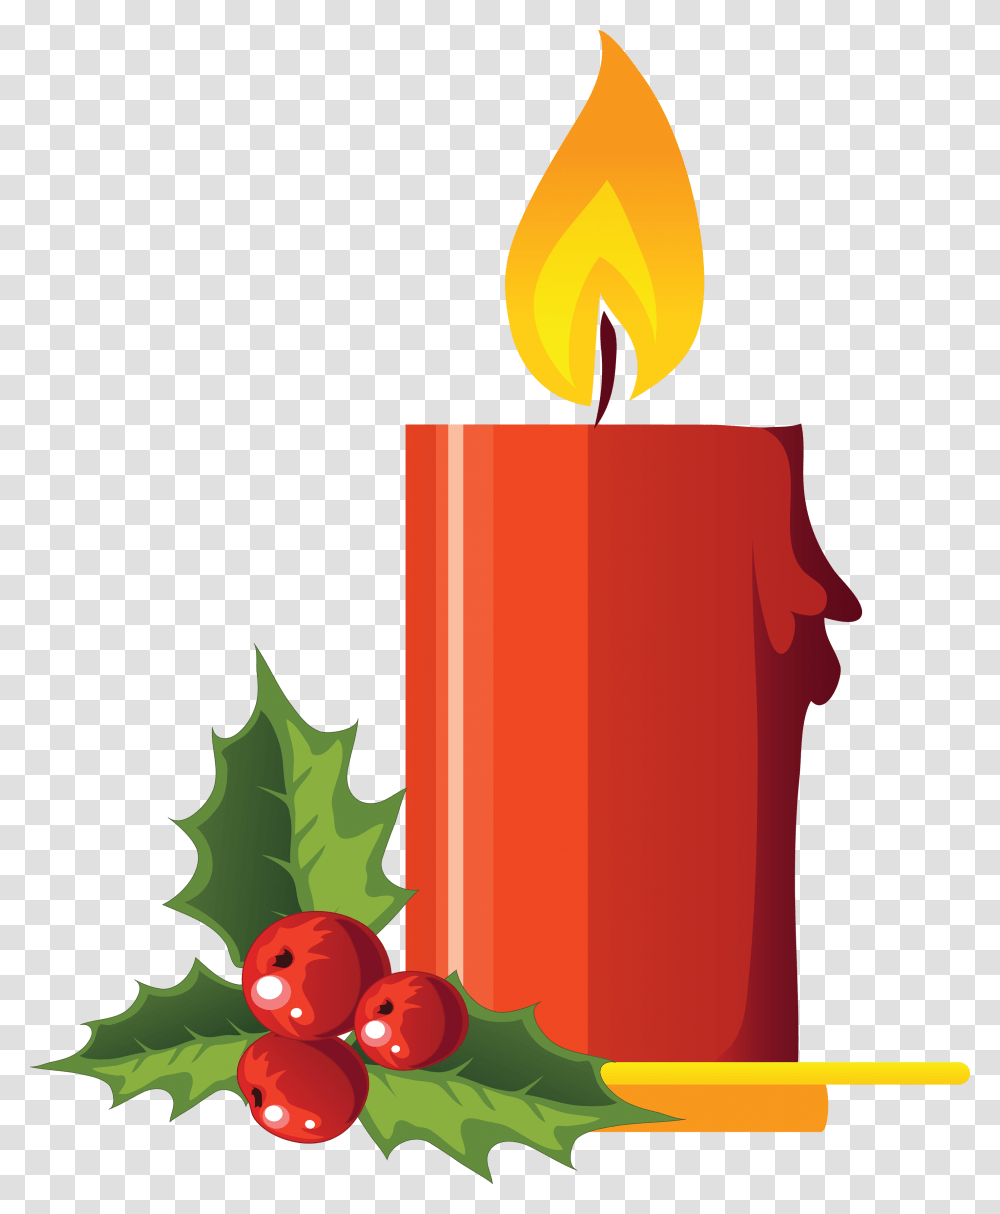 Candle Image Background Holly, Fire, Flame Transparent Png